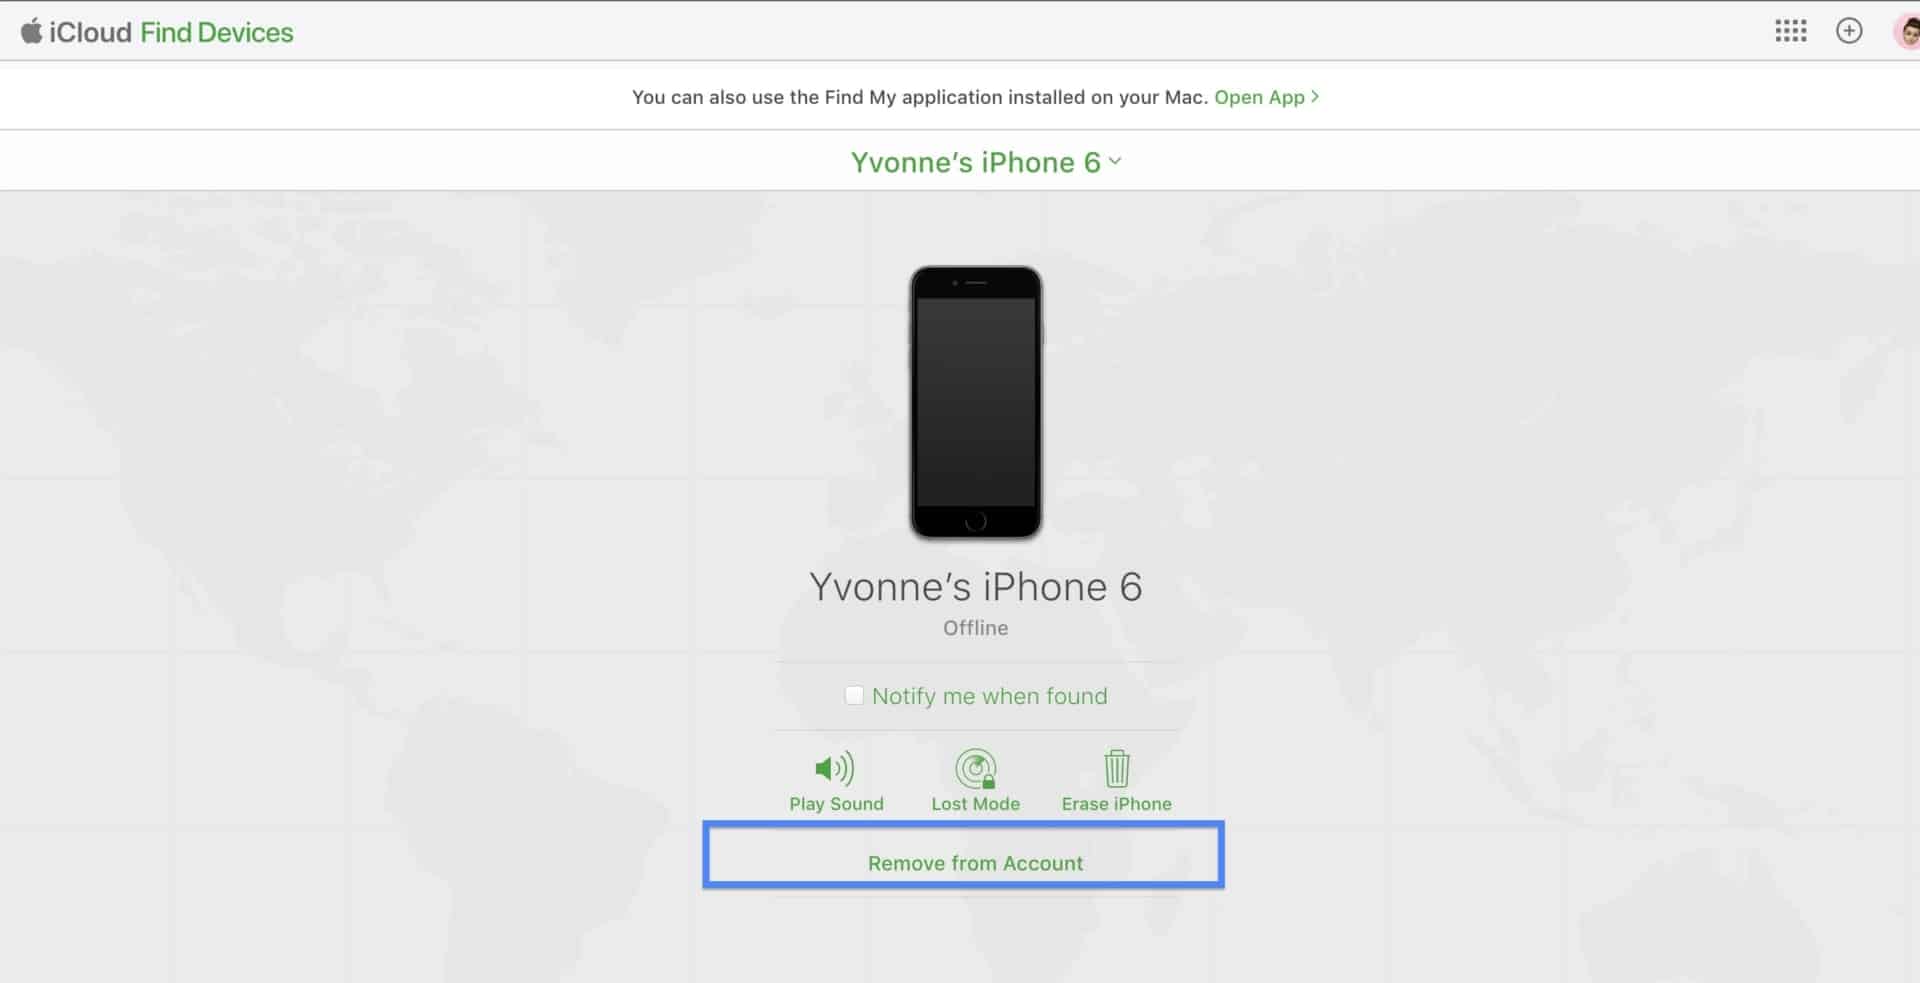 screenshot of step-by-step instructions on how to disable Find My iPhone on other devices